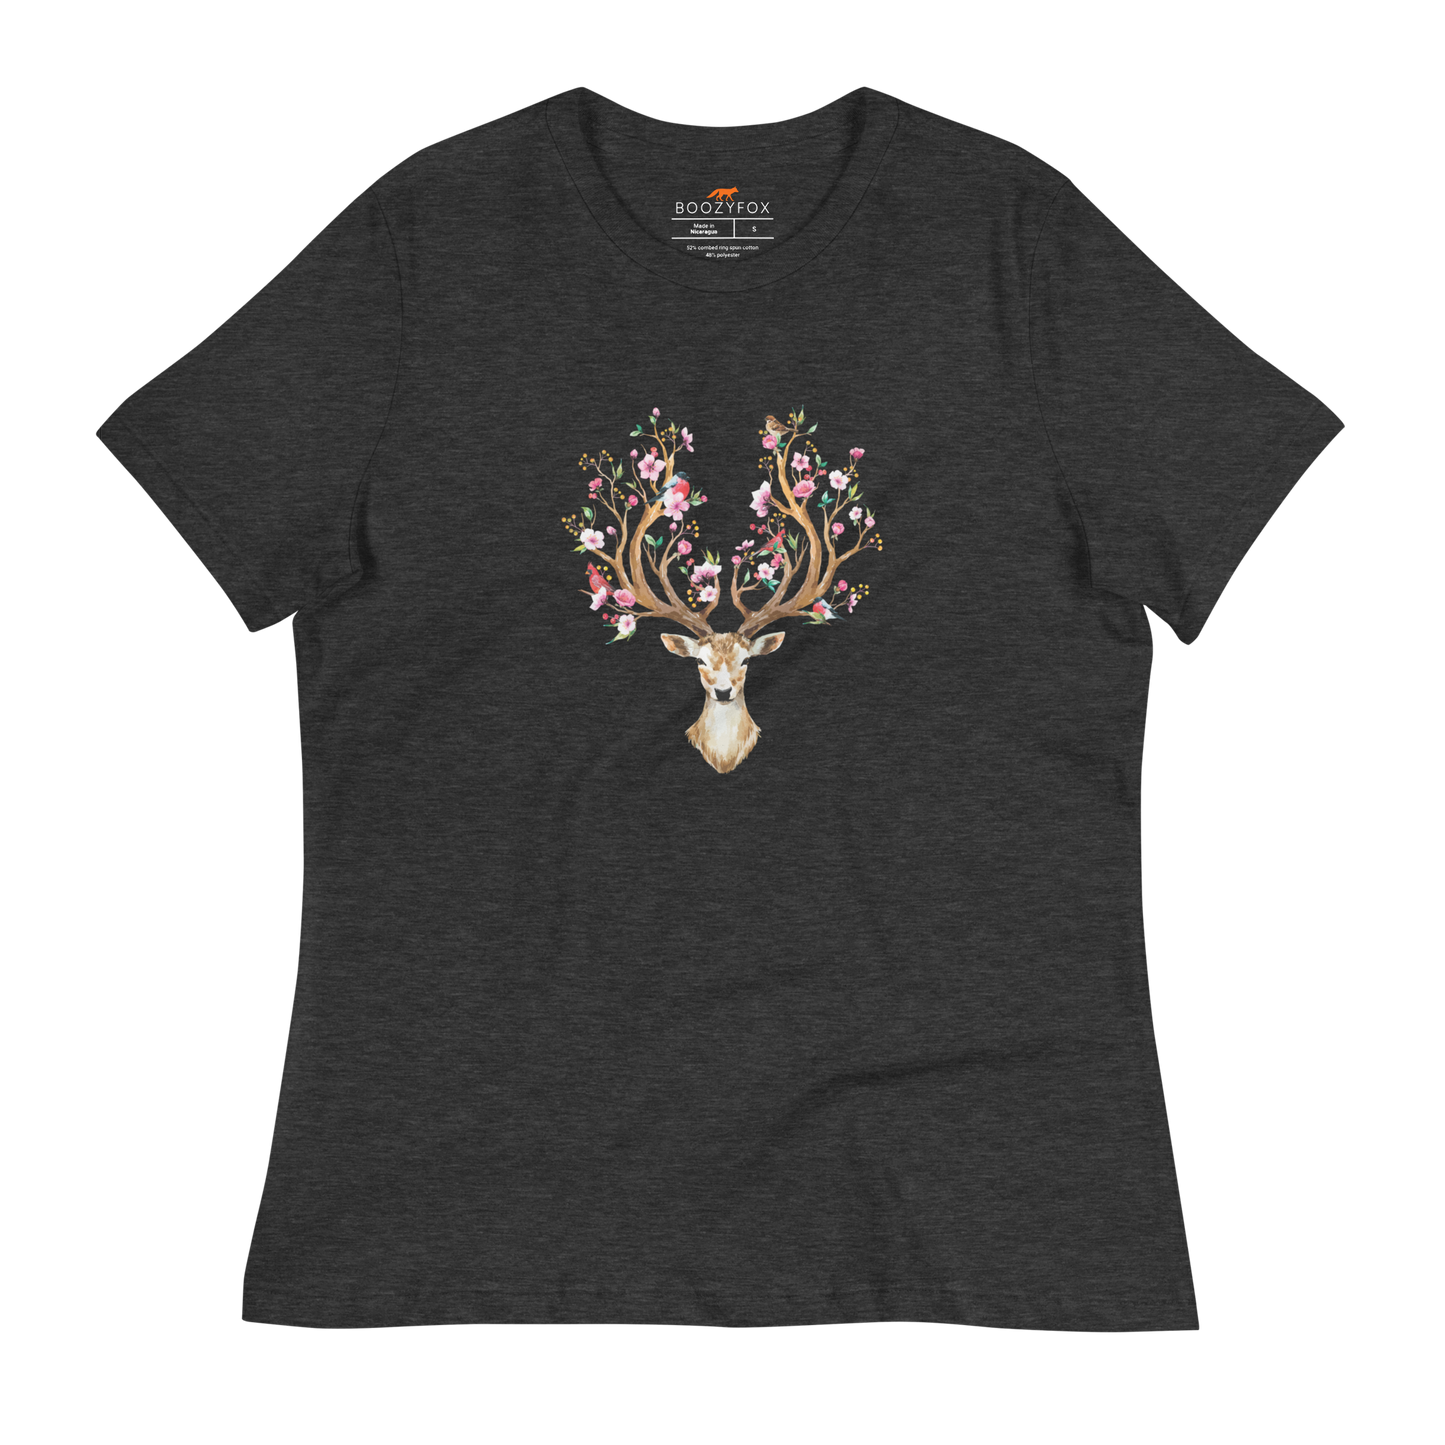 Women's relaxed dark grey heather Deer t-shirt featuring an eye-catching Floral Red Deer graphic on the chest - Women's Graphic Deer Tees - Boozy Fox